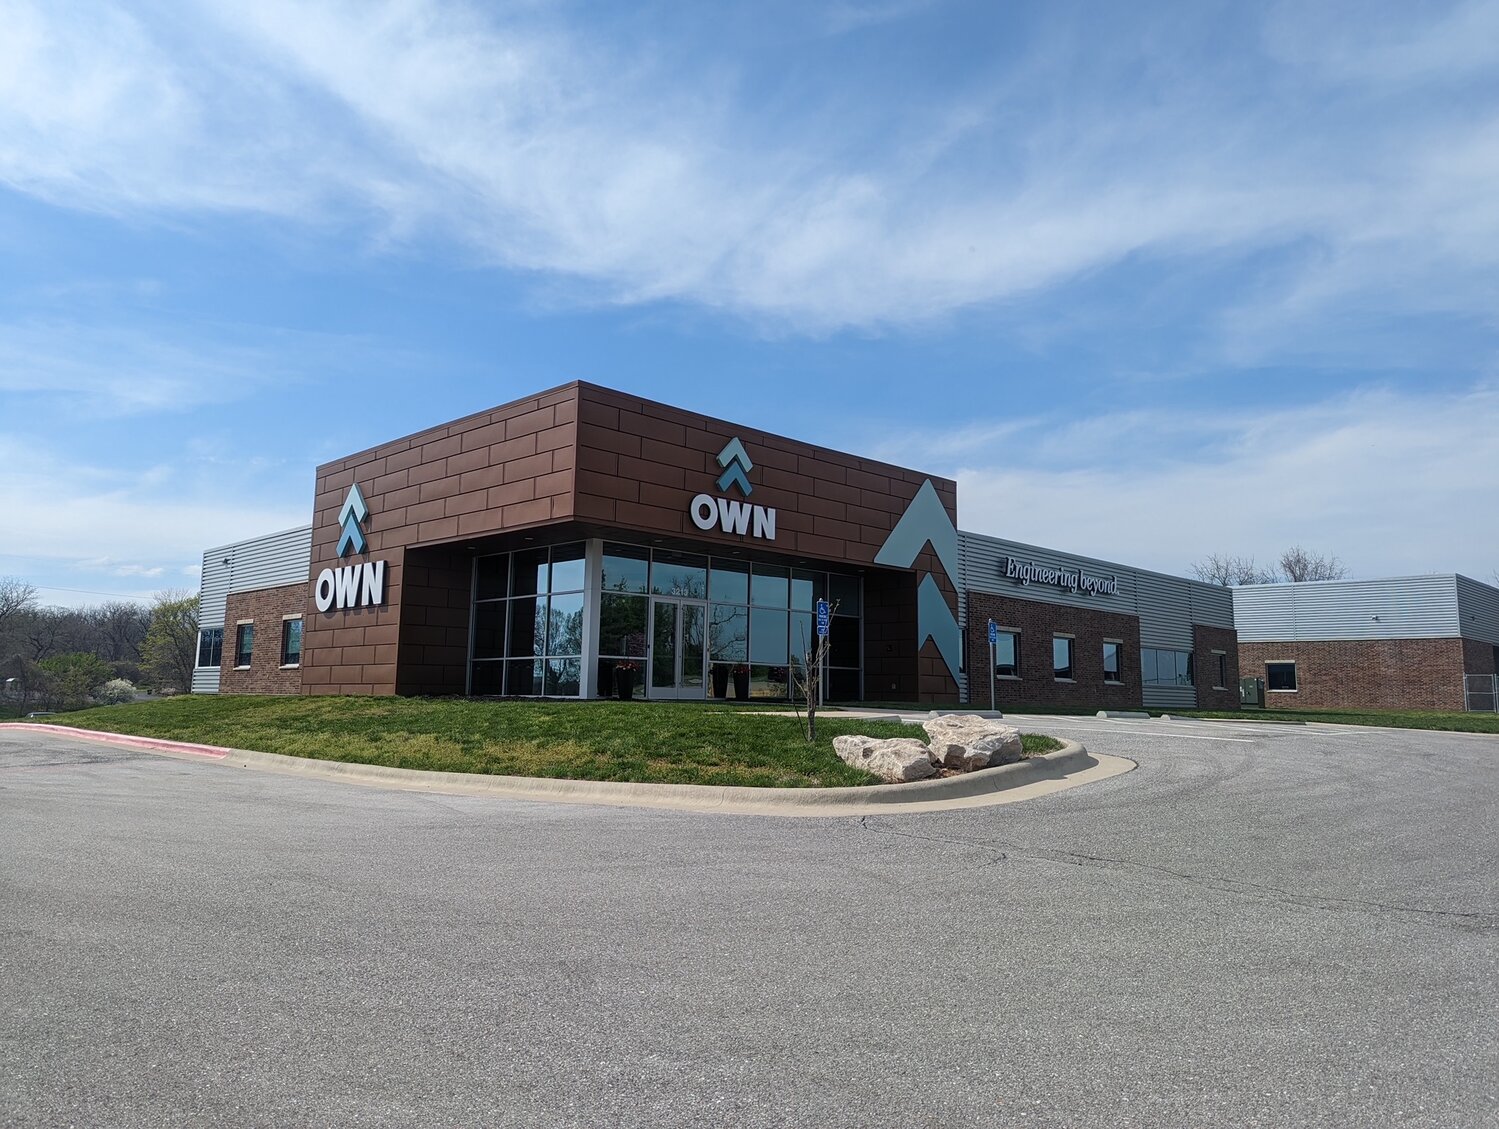 Own Inc. has 250 employees systemwide, its CEO says.